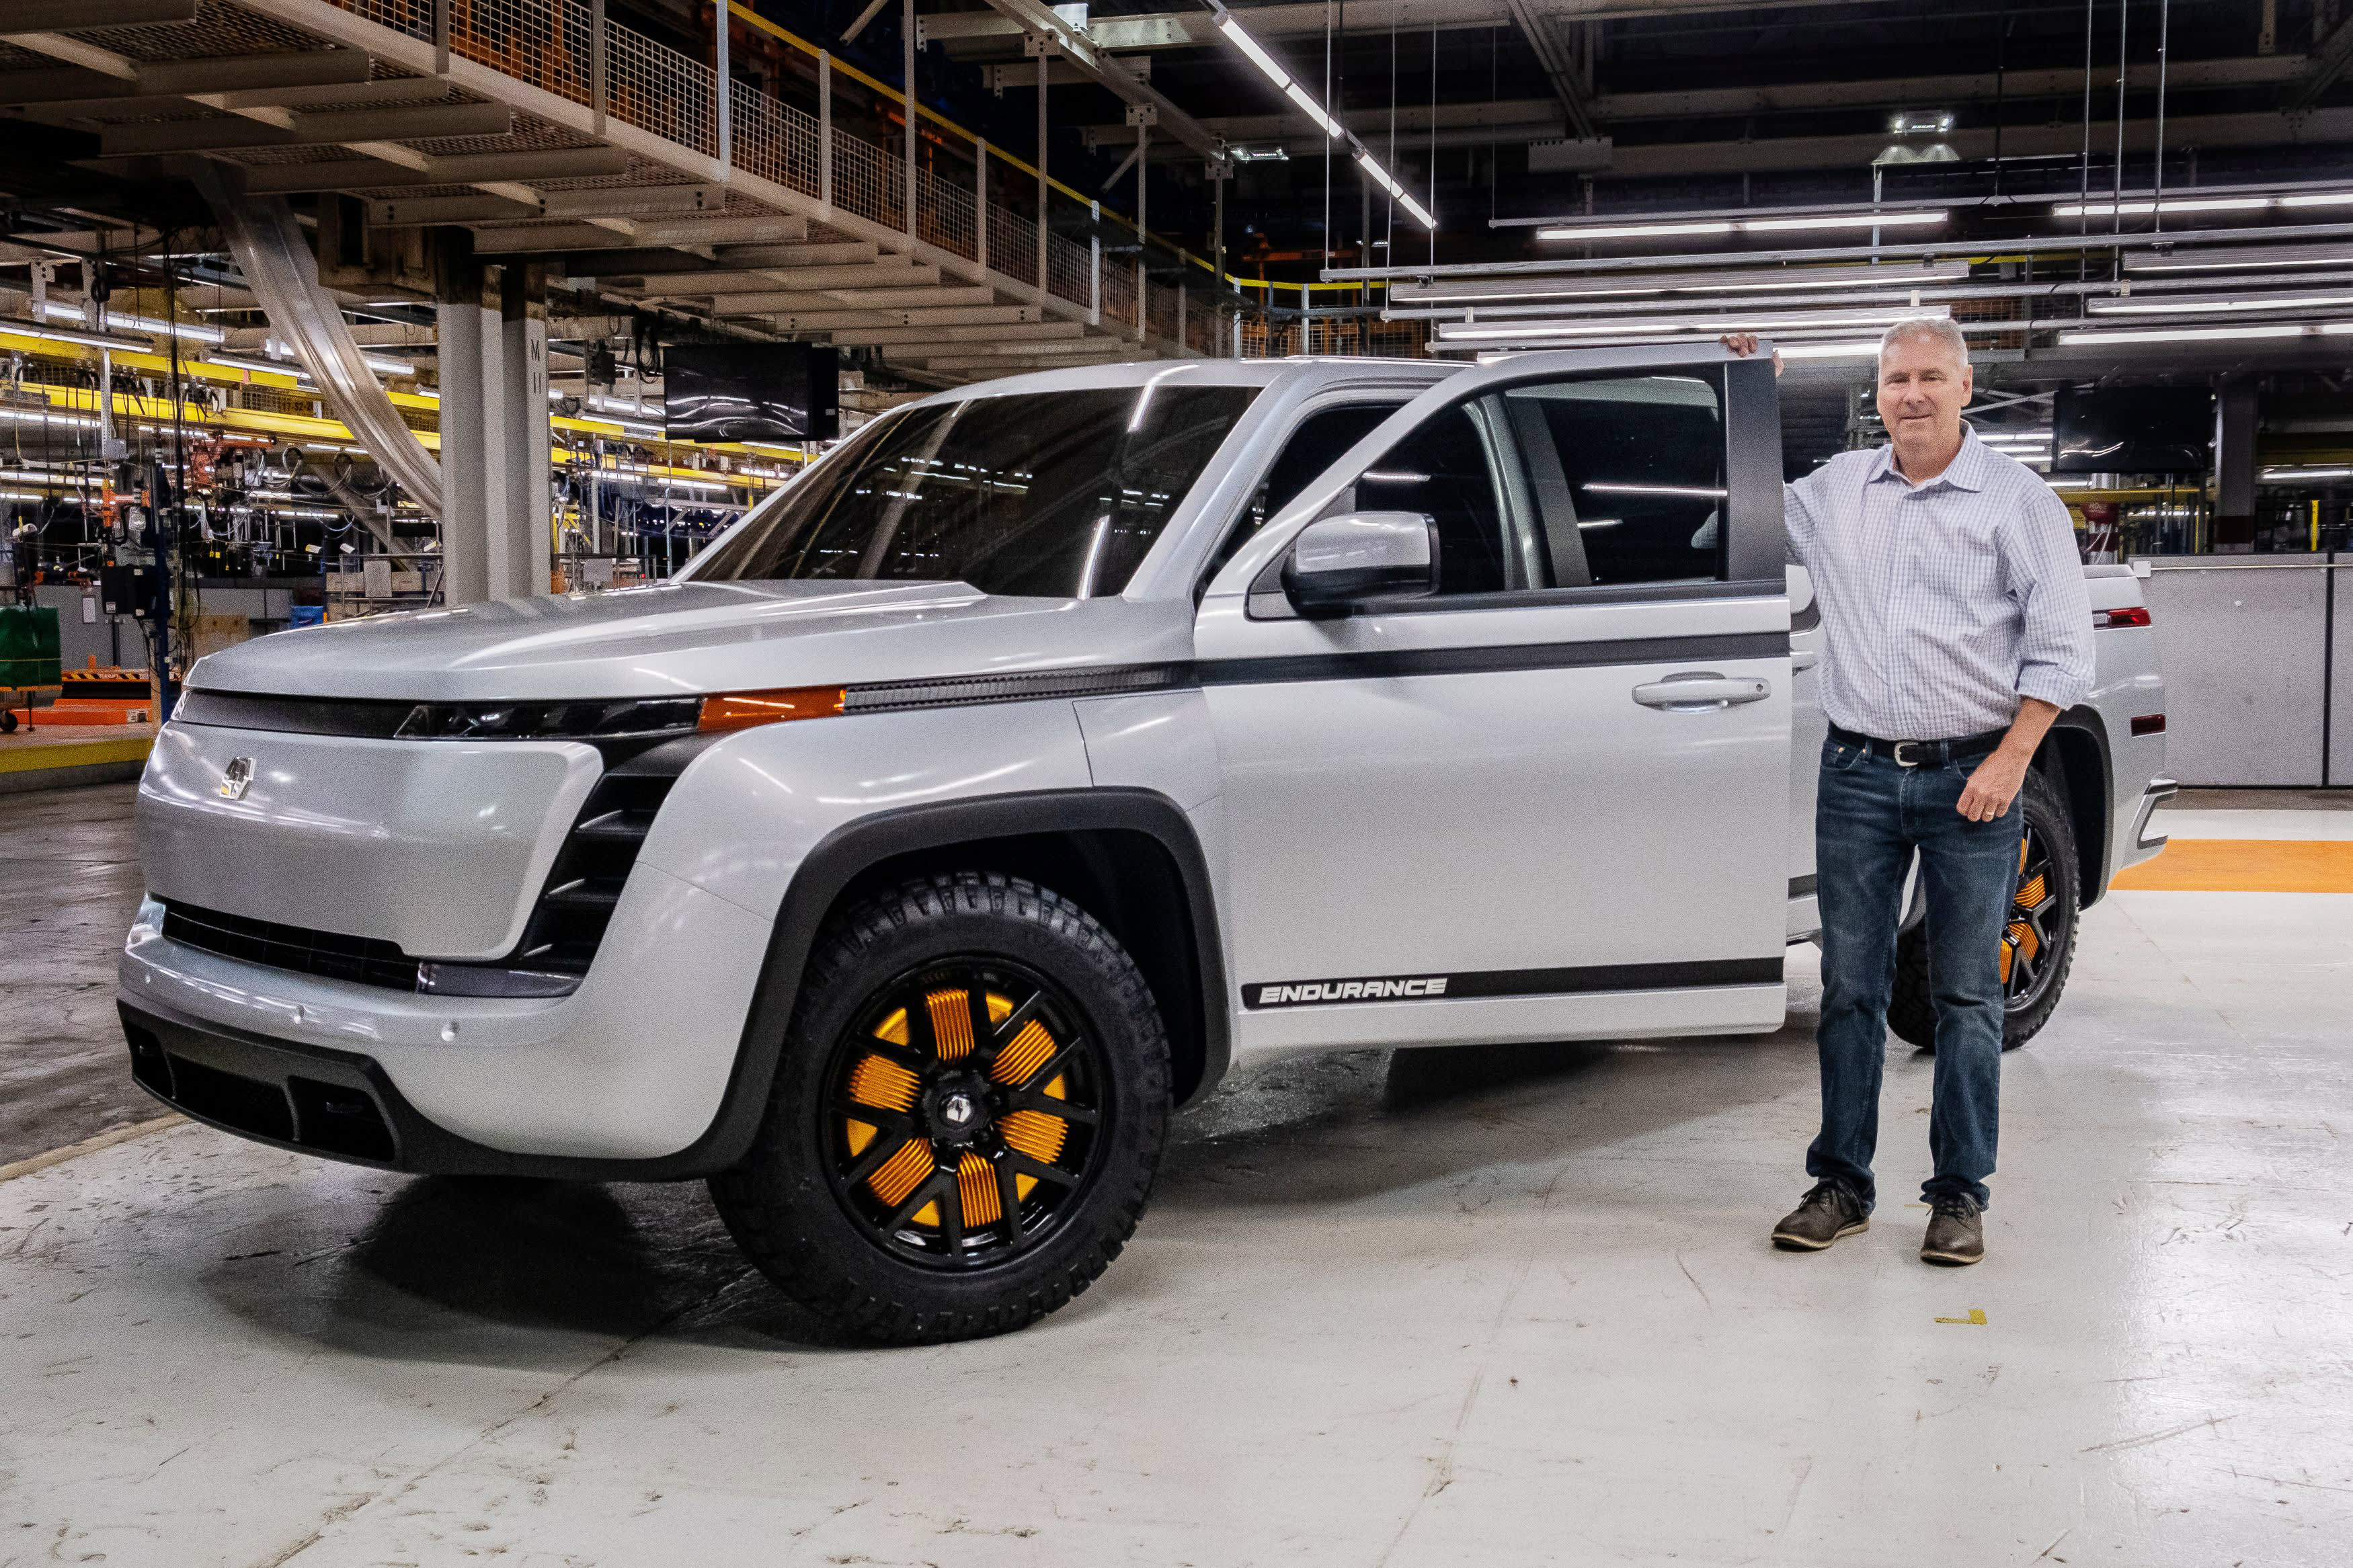 Lordstown Motors’ shares tumble after slashing 2021 production plans, says it needs more capital